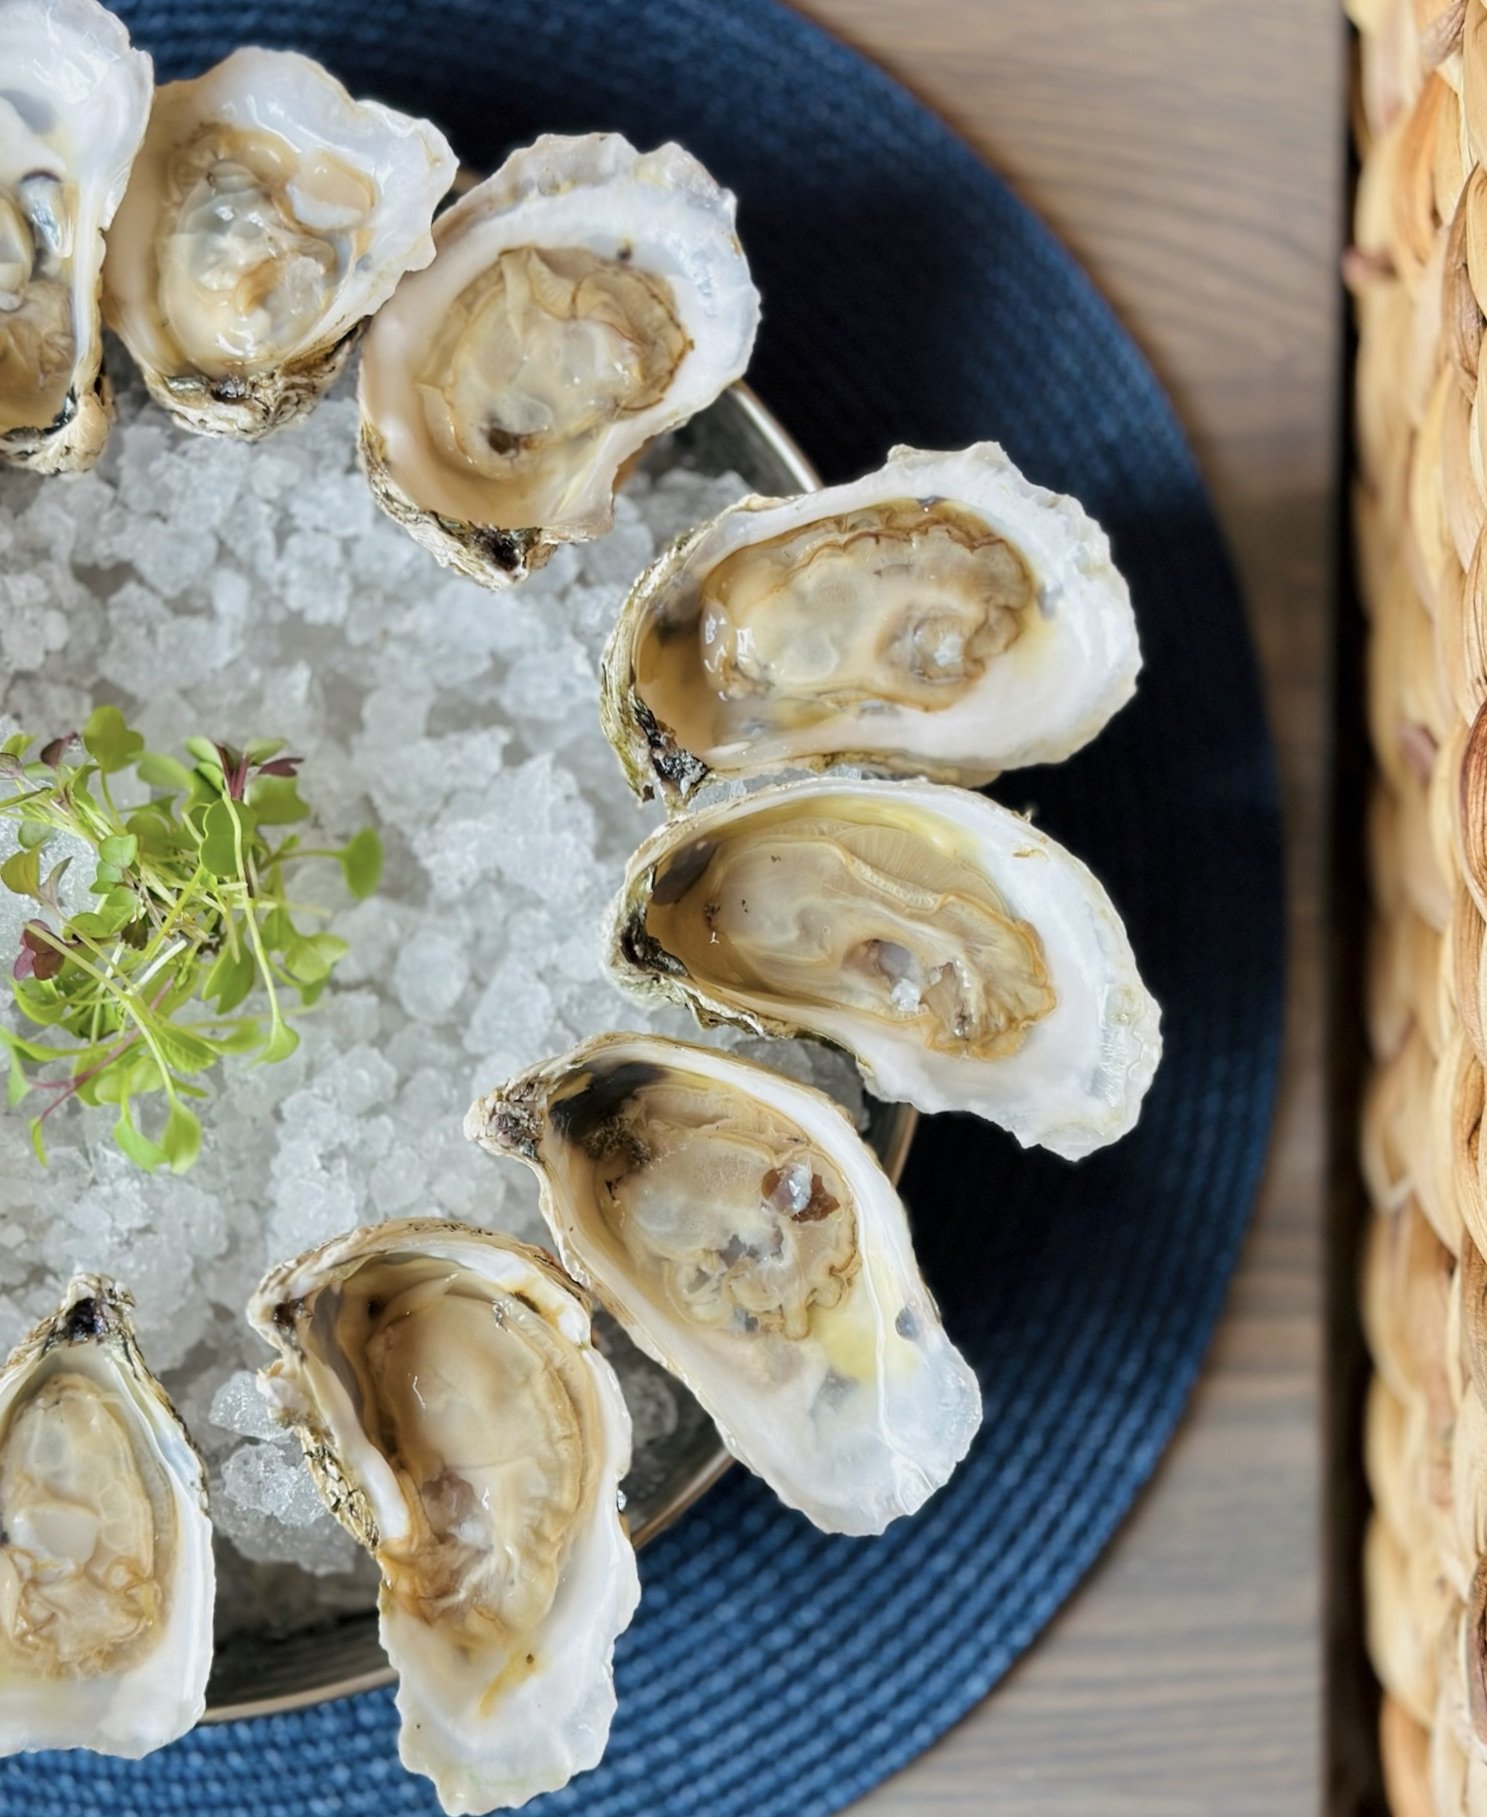 Did you know Oysters are one of the most sustainable seafood options out there? They are filter feeders so they help keep the water clean by removing algae, organic matter, &amp; excess nutrients as they grow. One oyster can clean up to 50 gallons of